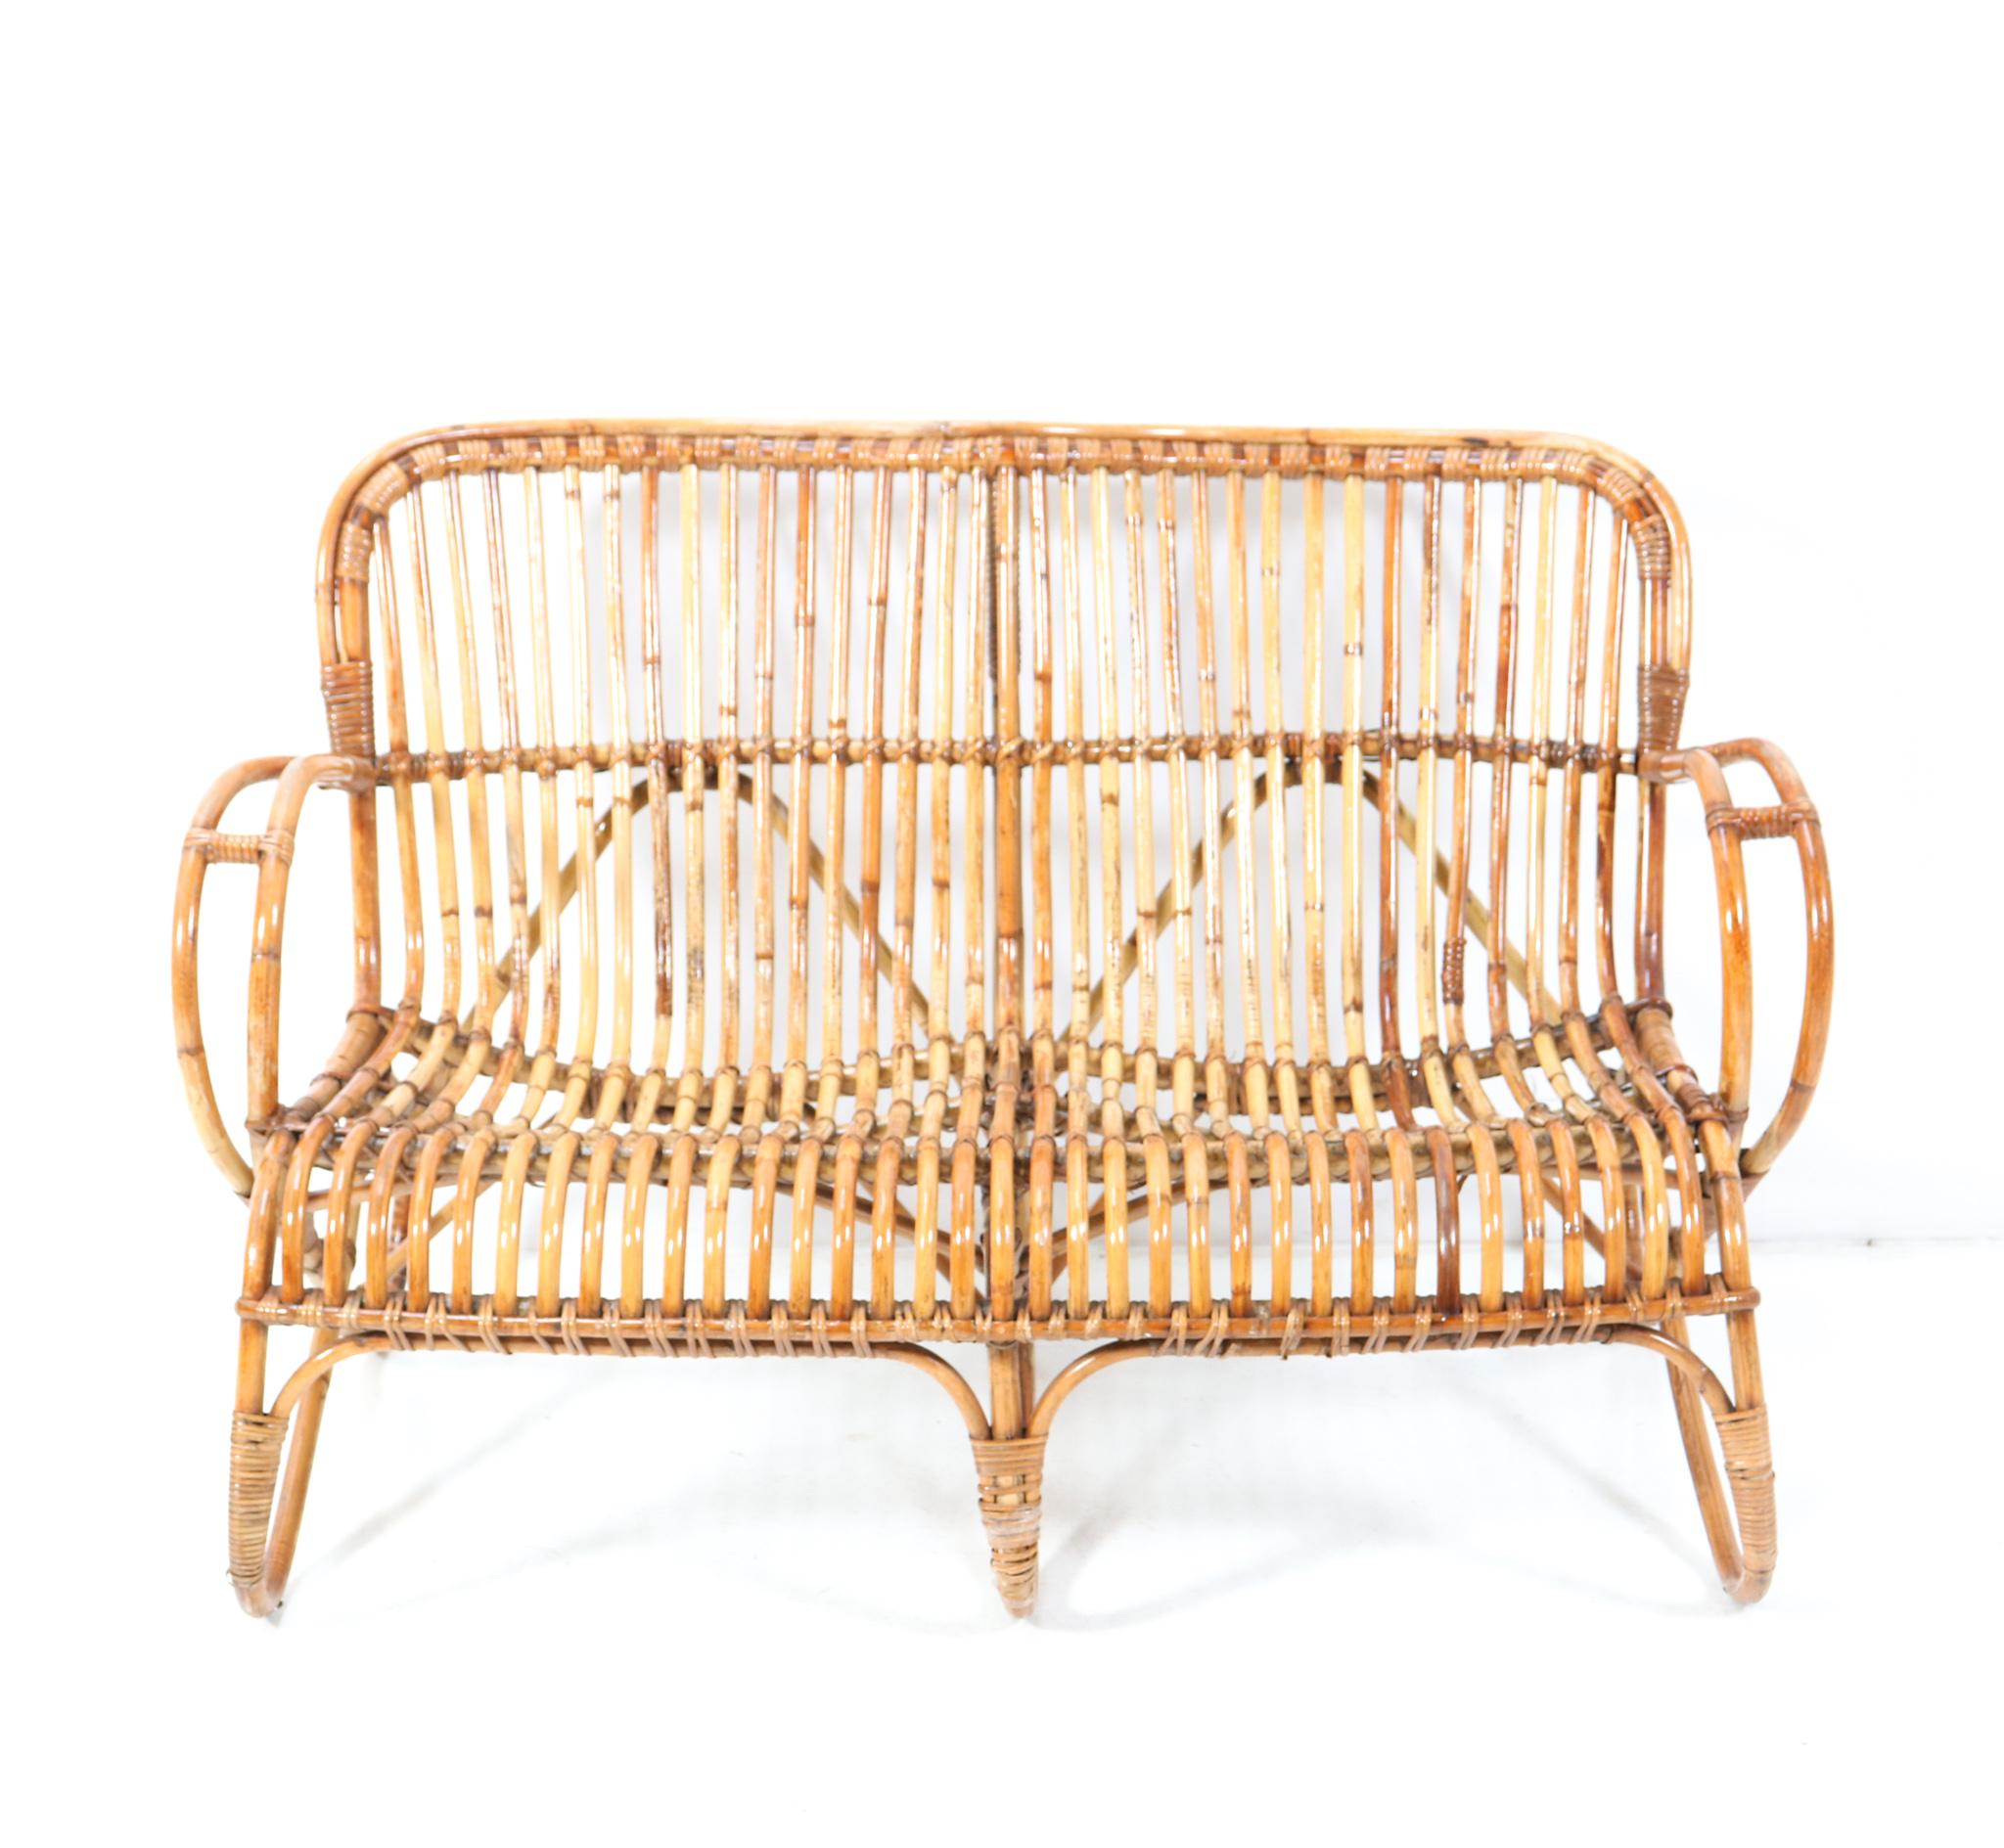 Elegant Vintage Mid-Century Modern love seat or sofa.
Design by Rohe Noordwolde.
Striking Dutch design from the 1960s.
Nicely shaped rattan and bamboo frame.
This wonderful Vintage Mid-Century Modern love seat or sofa is in very good condition